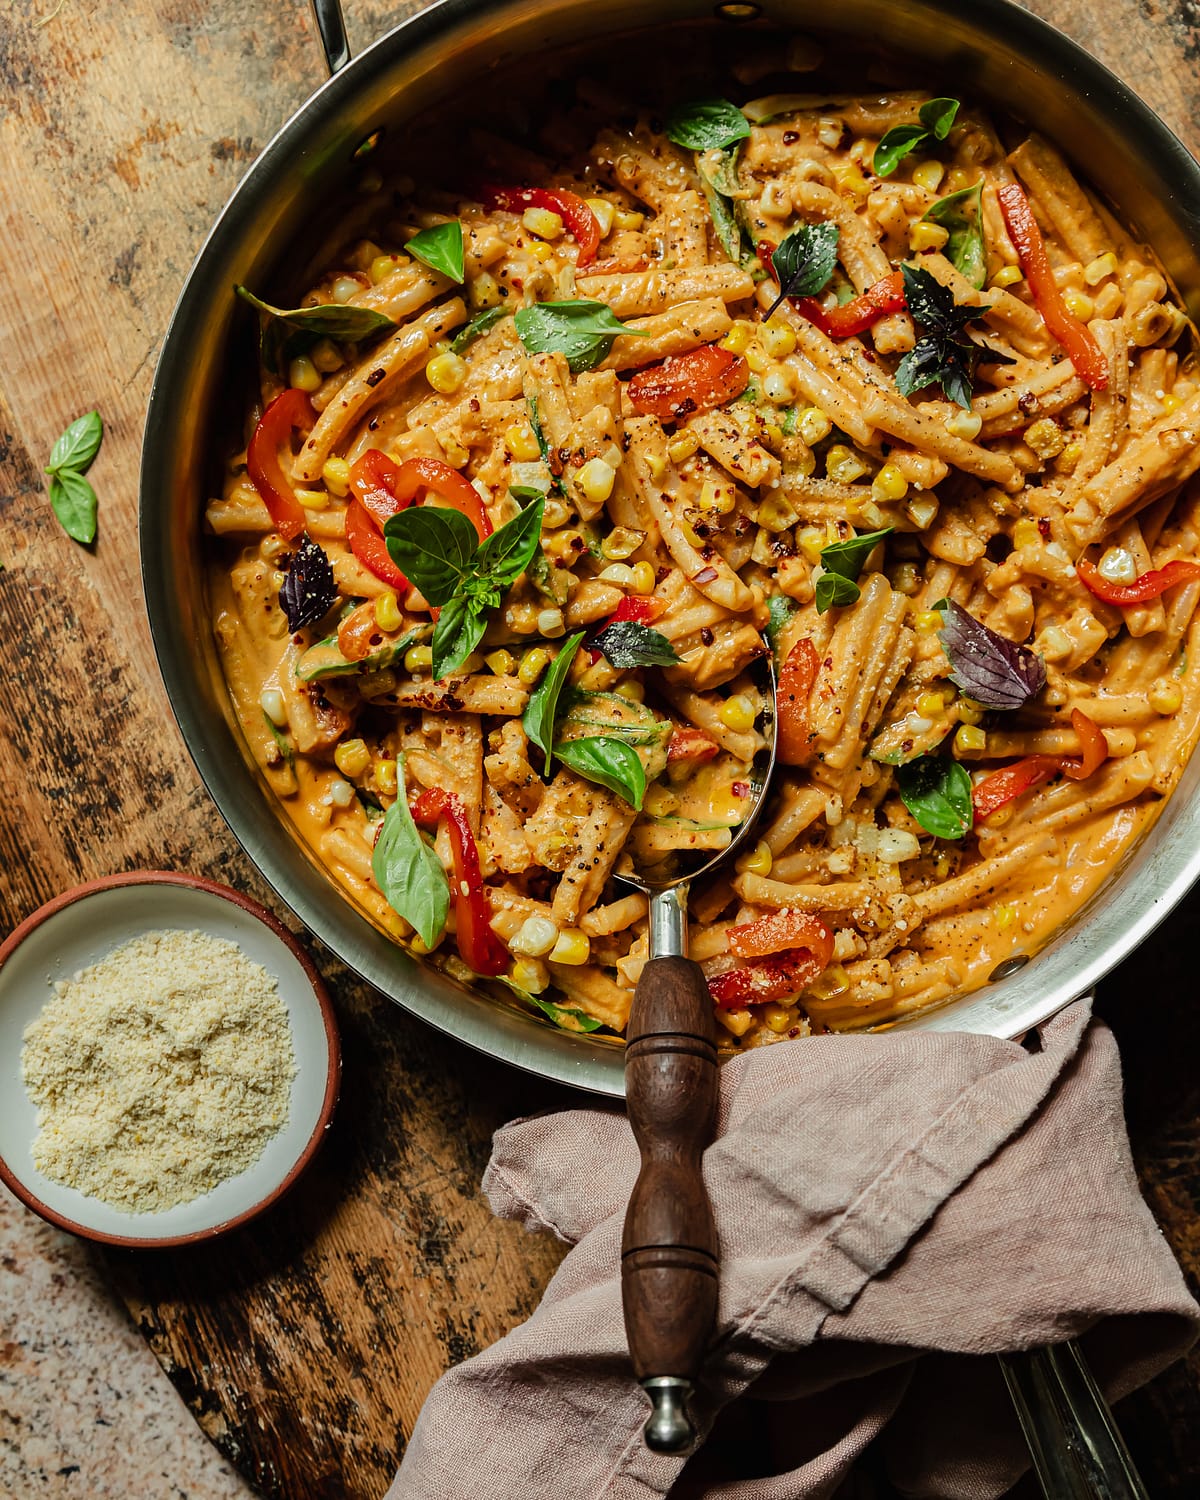 An overhead shot shows a creamy vegan red pepper pasta in a stainless steel pan. The short-shaped pasta is garnished with fresh basil leaves, strips of roasted red pepper, charred corn kernels, dried chili flakes, and freshly ground pepper.